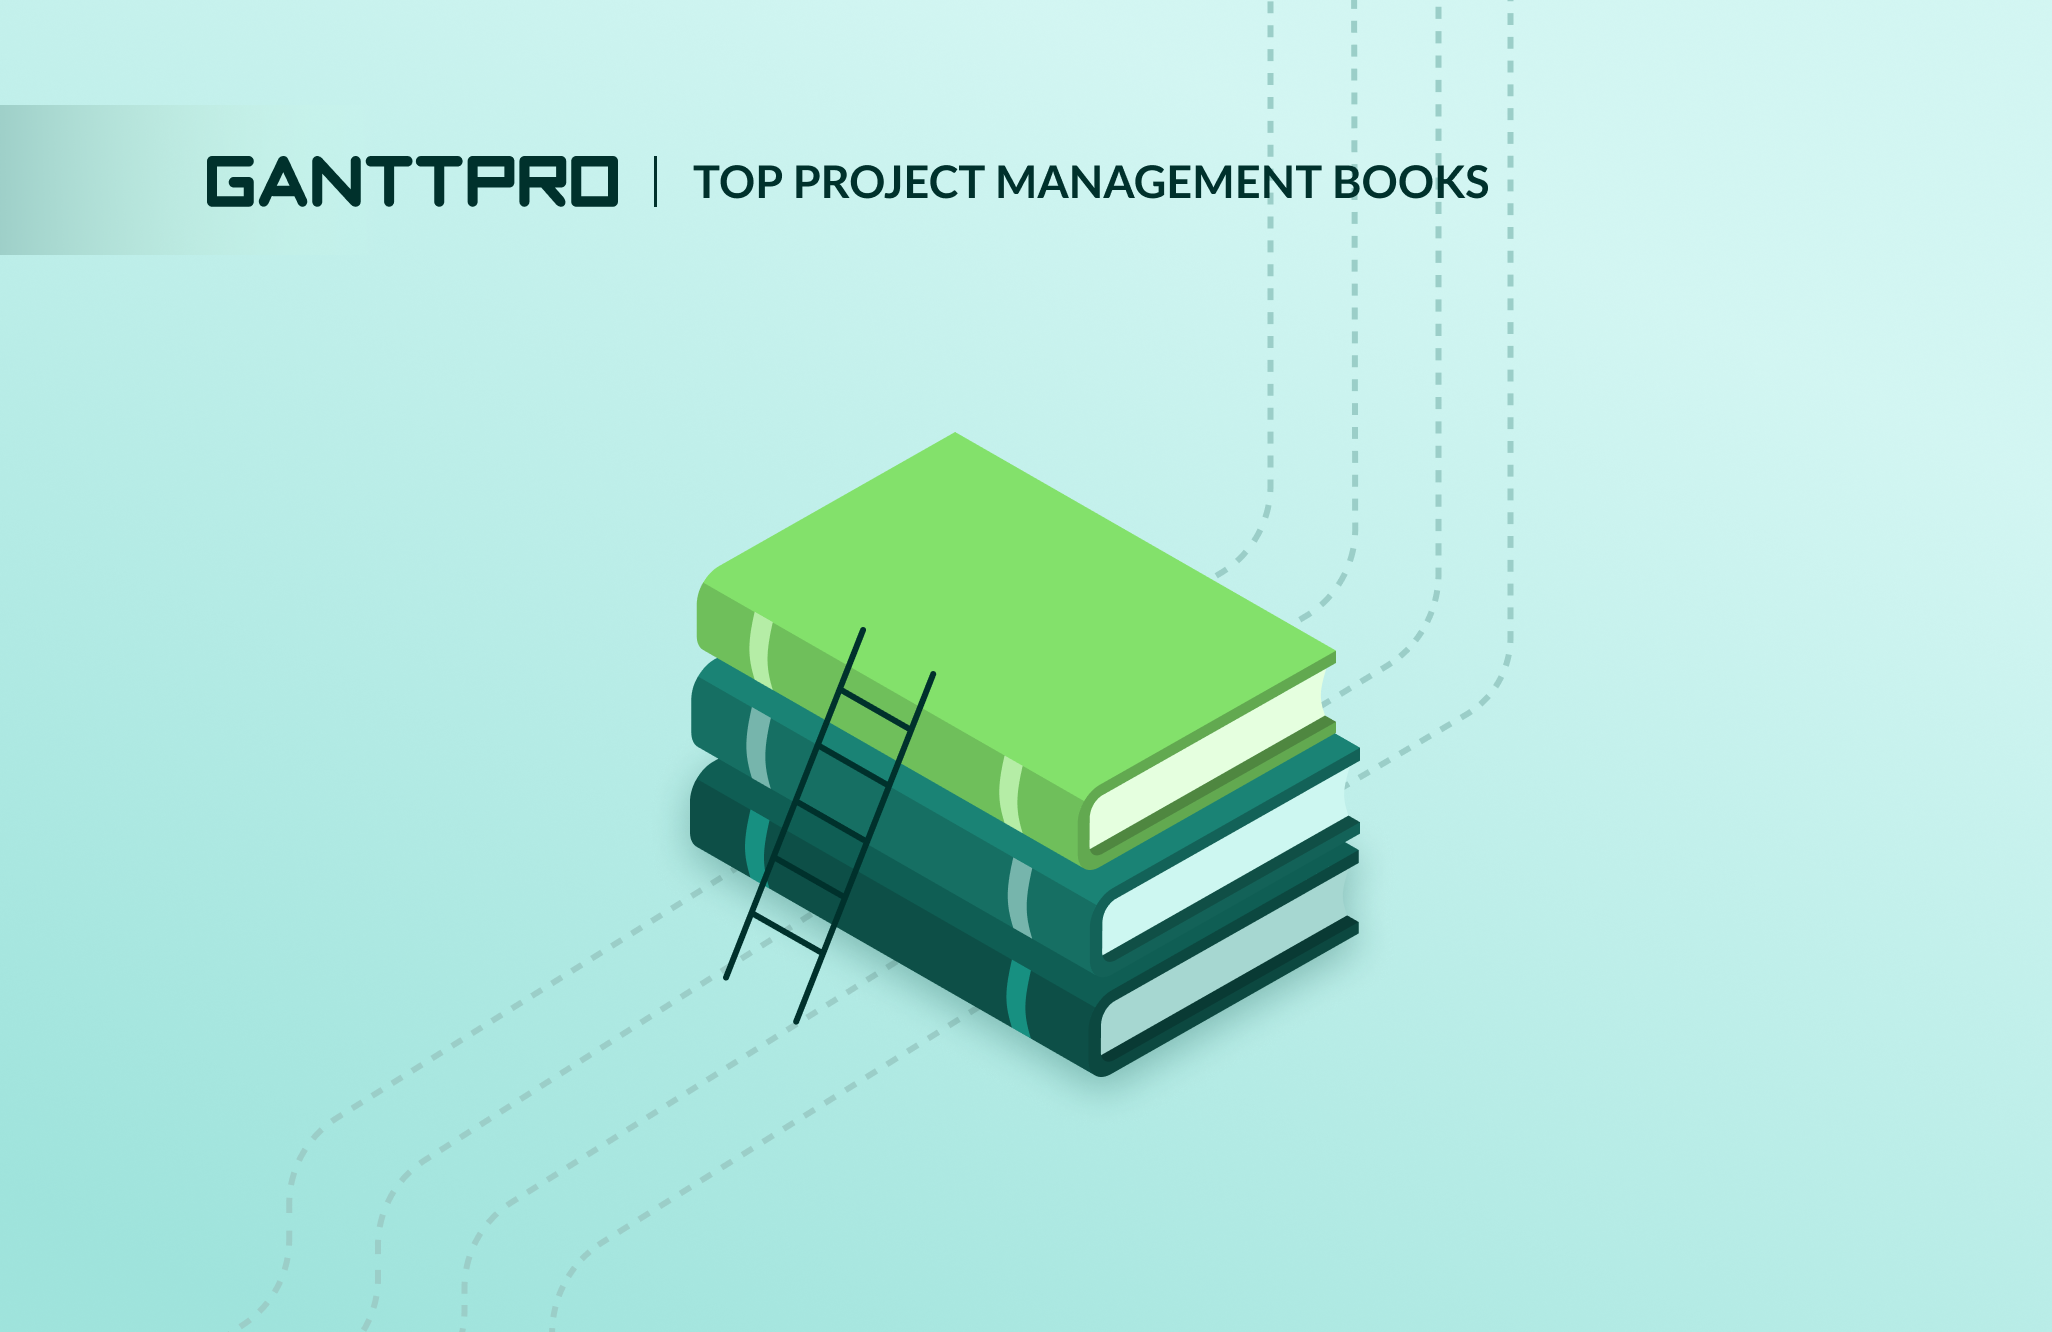 Project management books worth reading